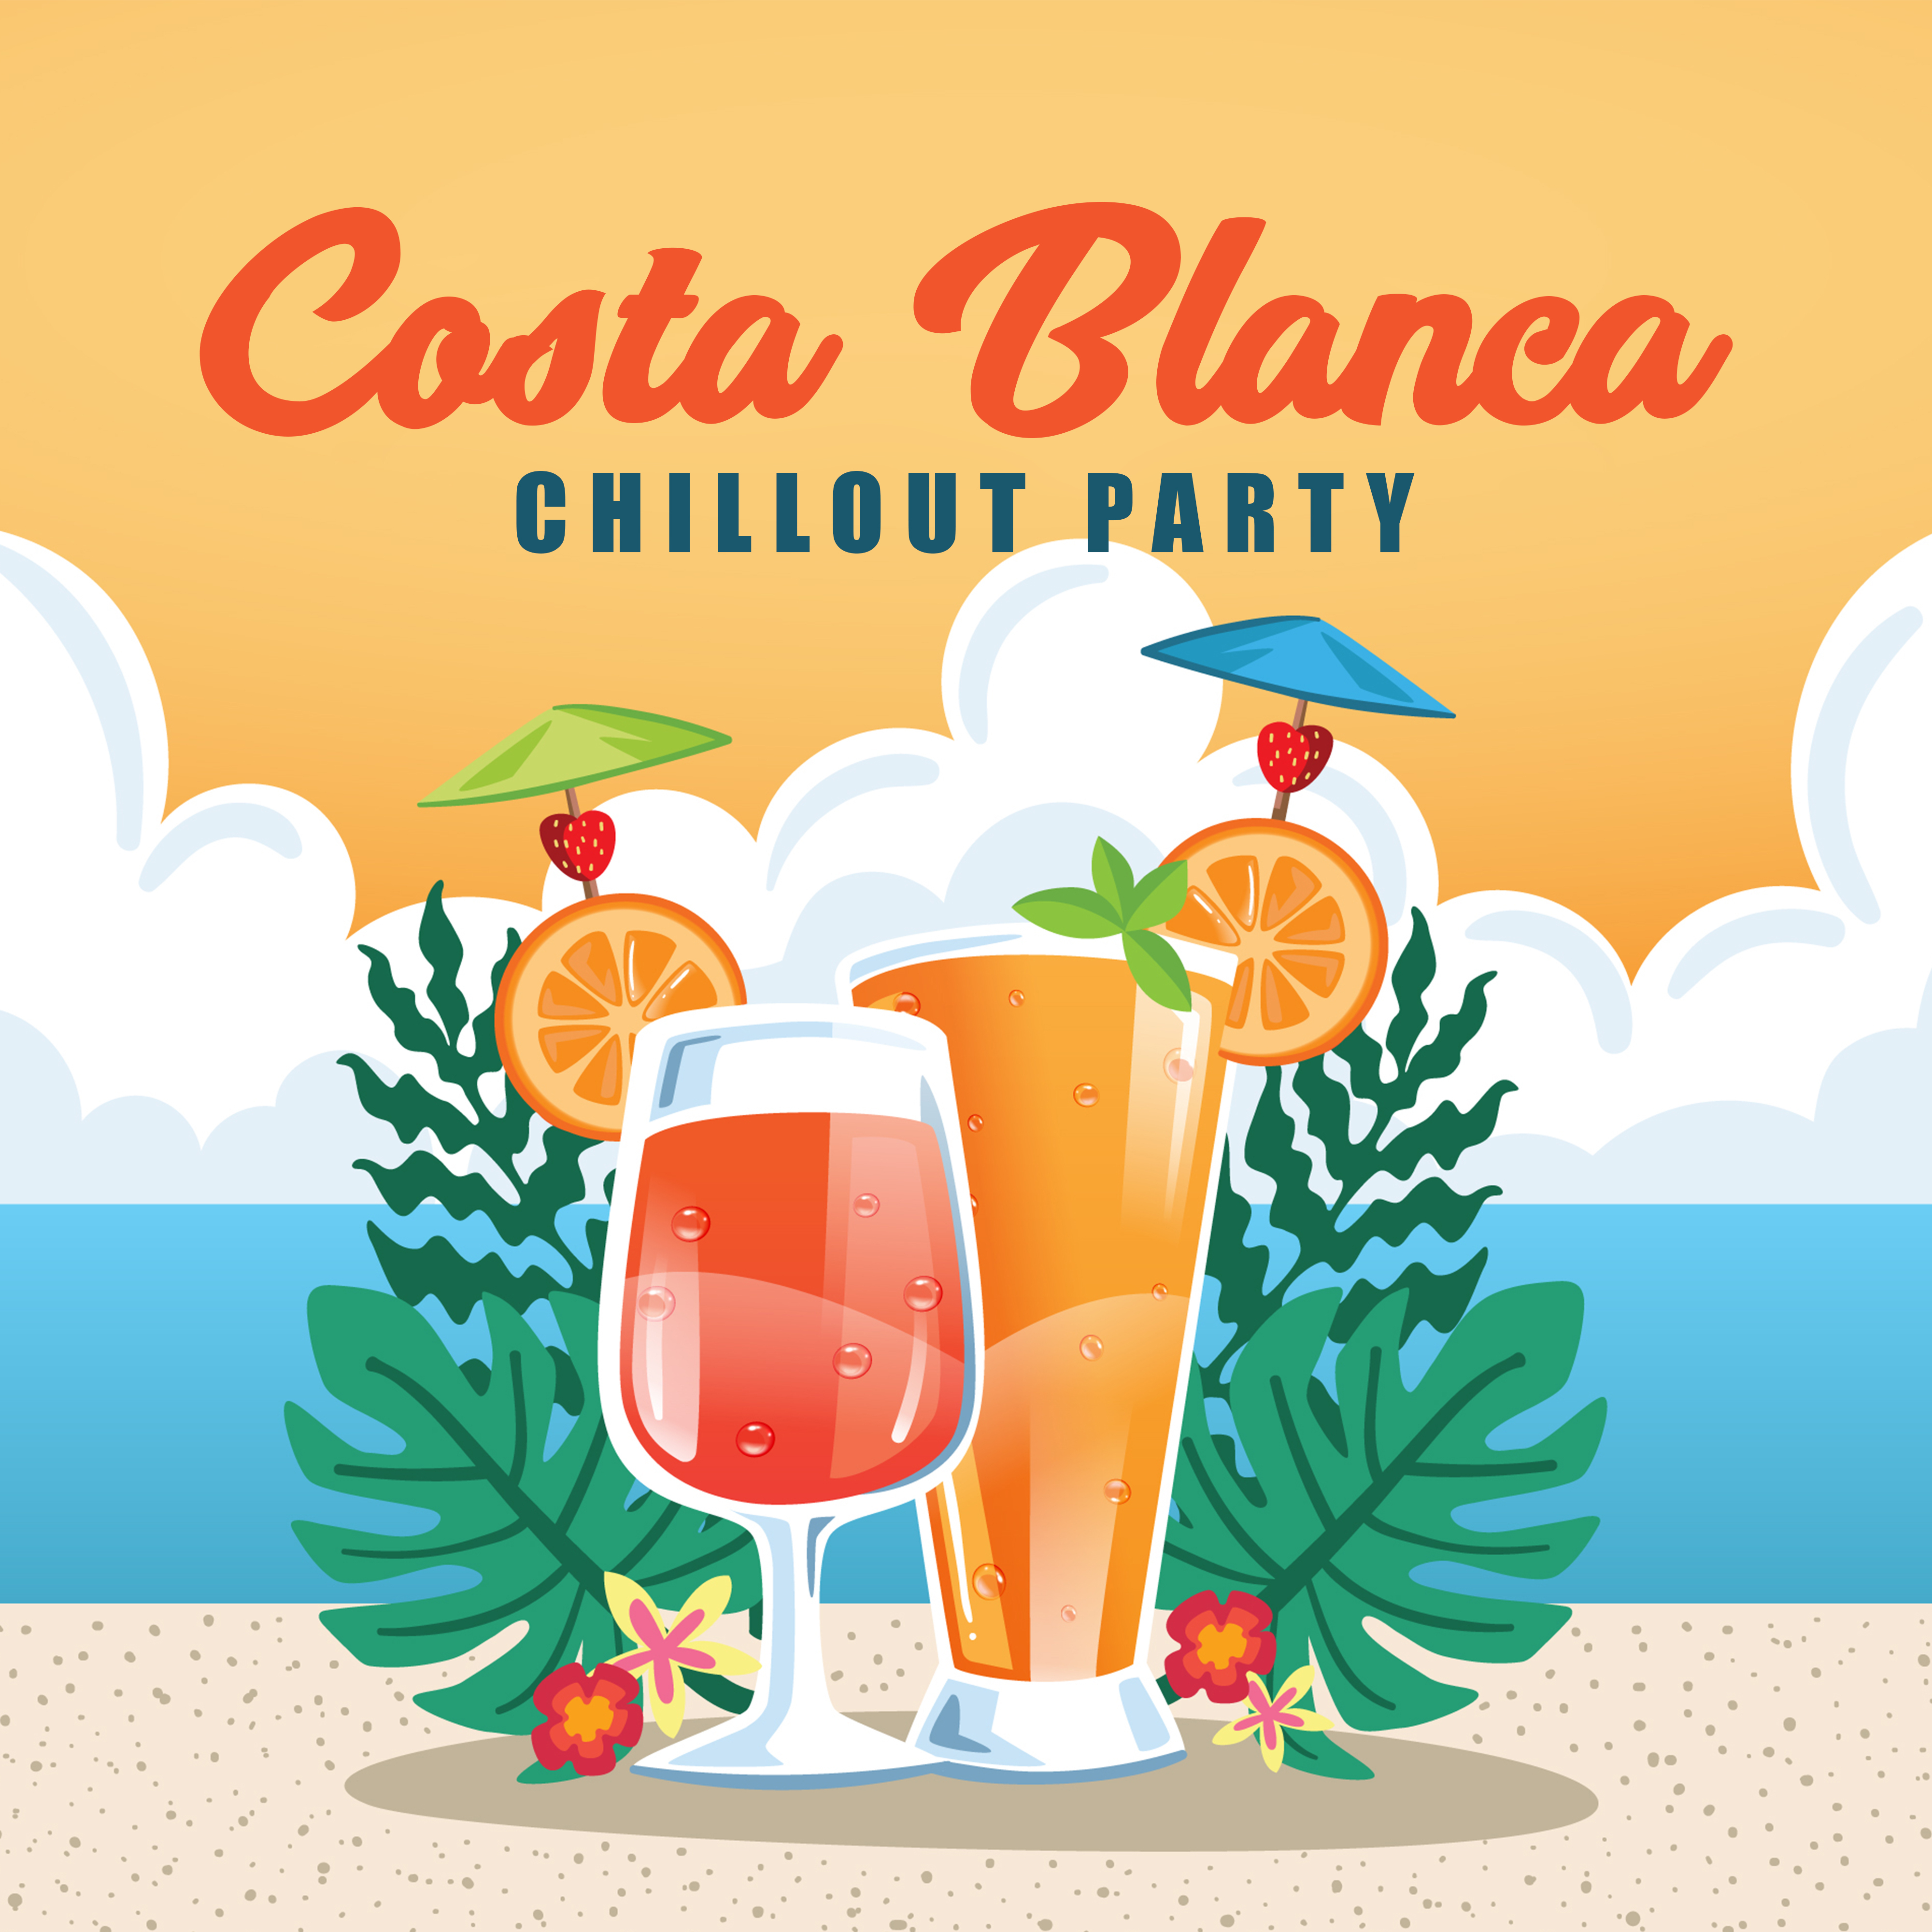 Costa Blanca Chillout Party